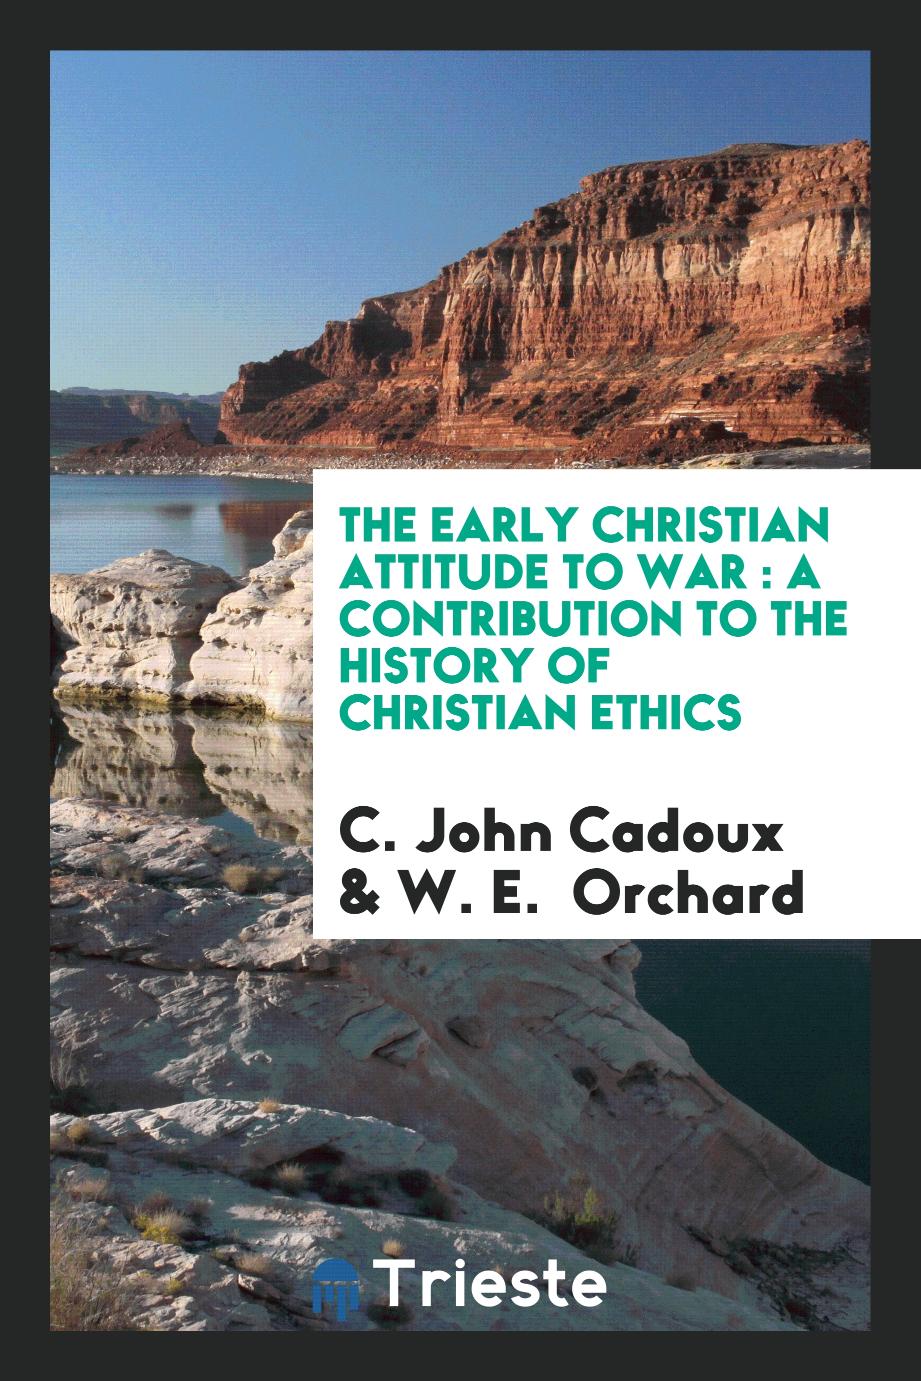 The Early Christian Attitude to War : A Contribution to the History of Christian Ethics